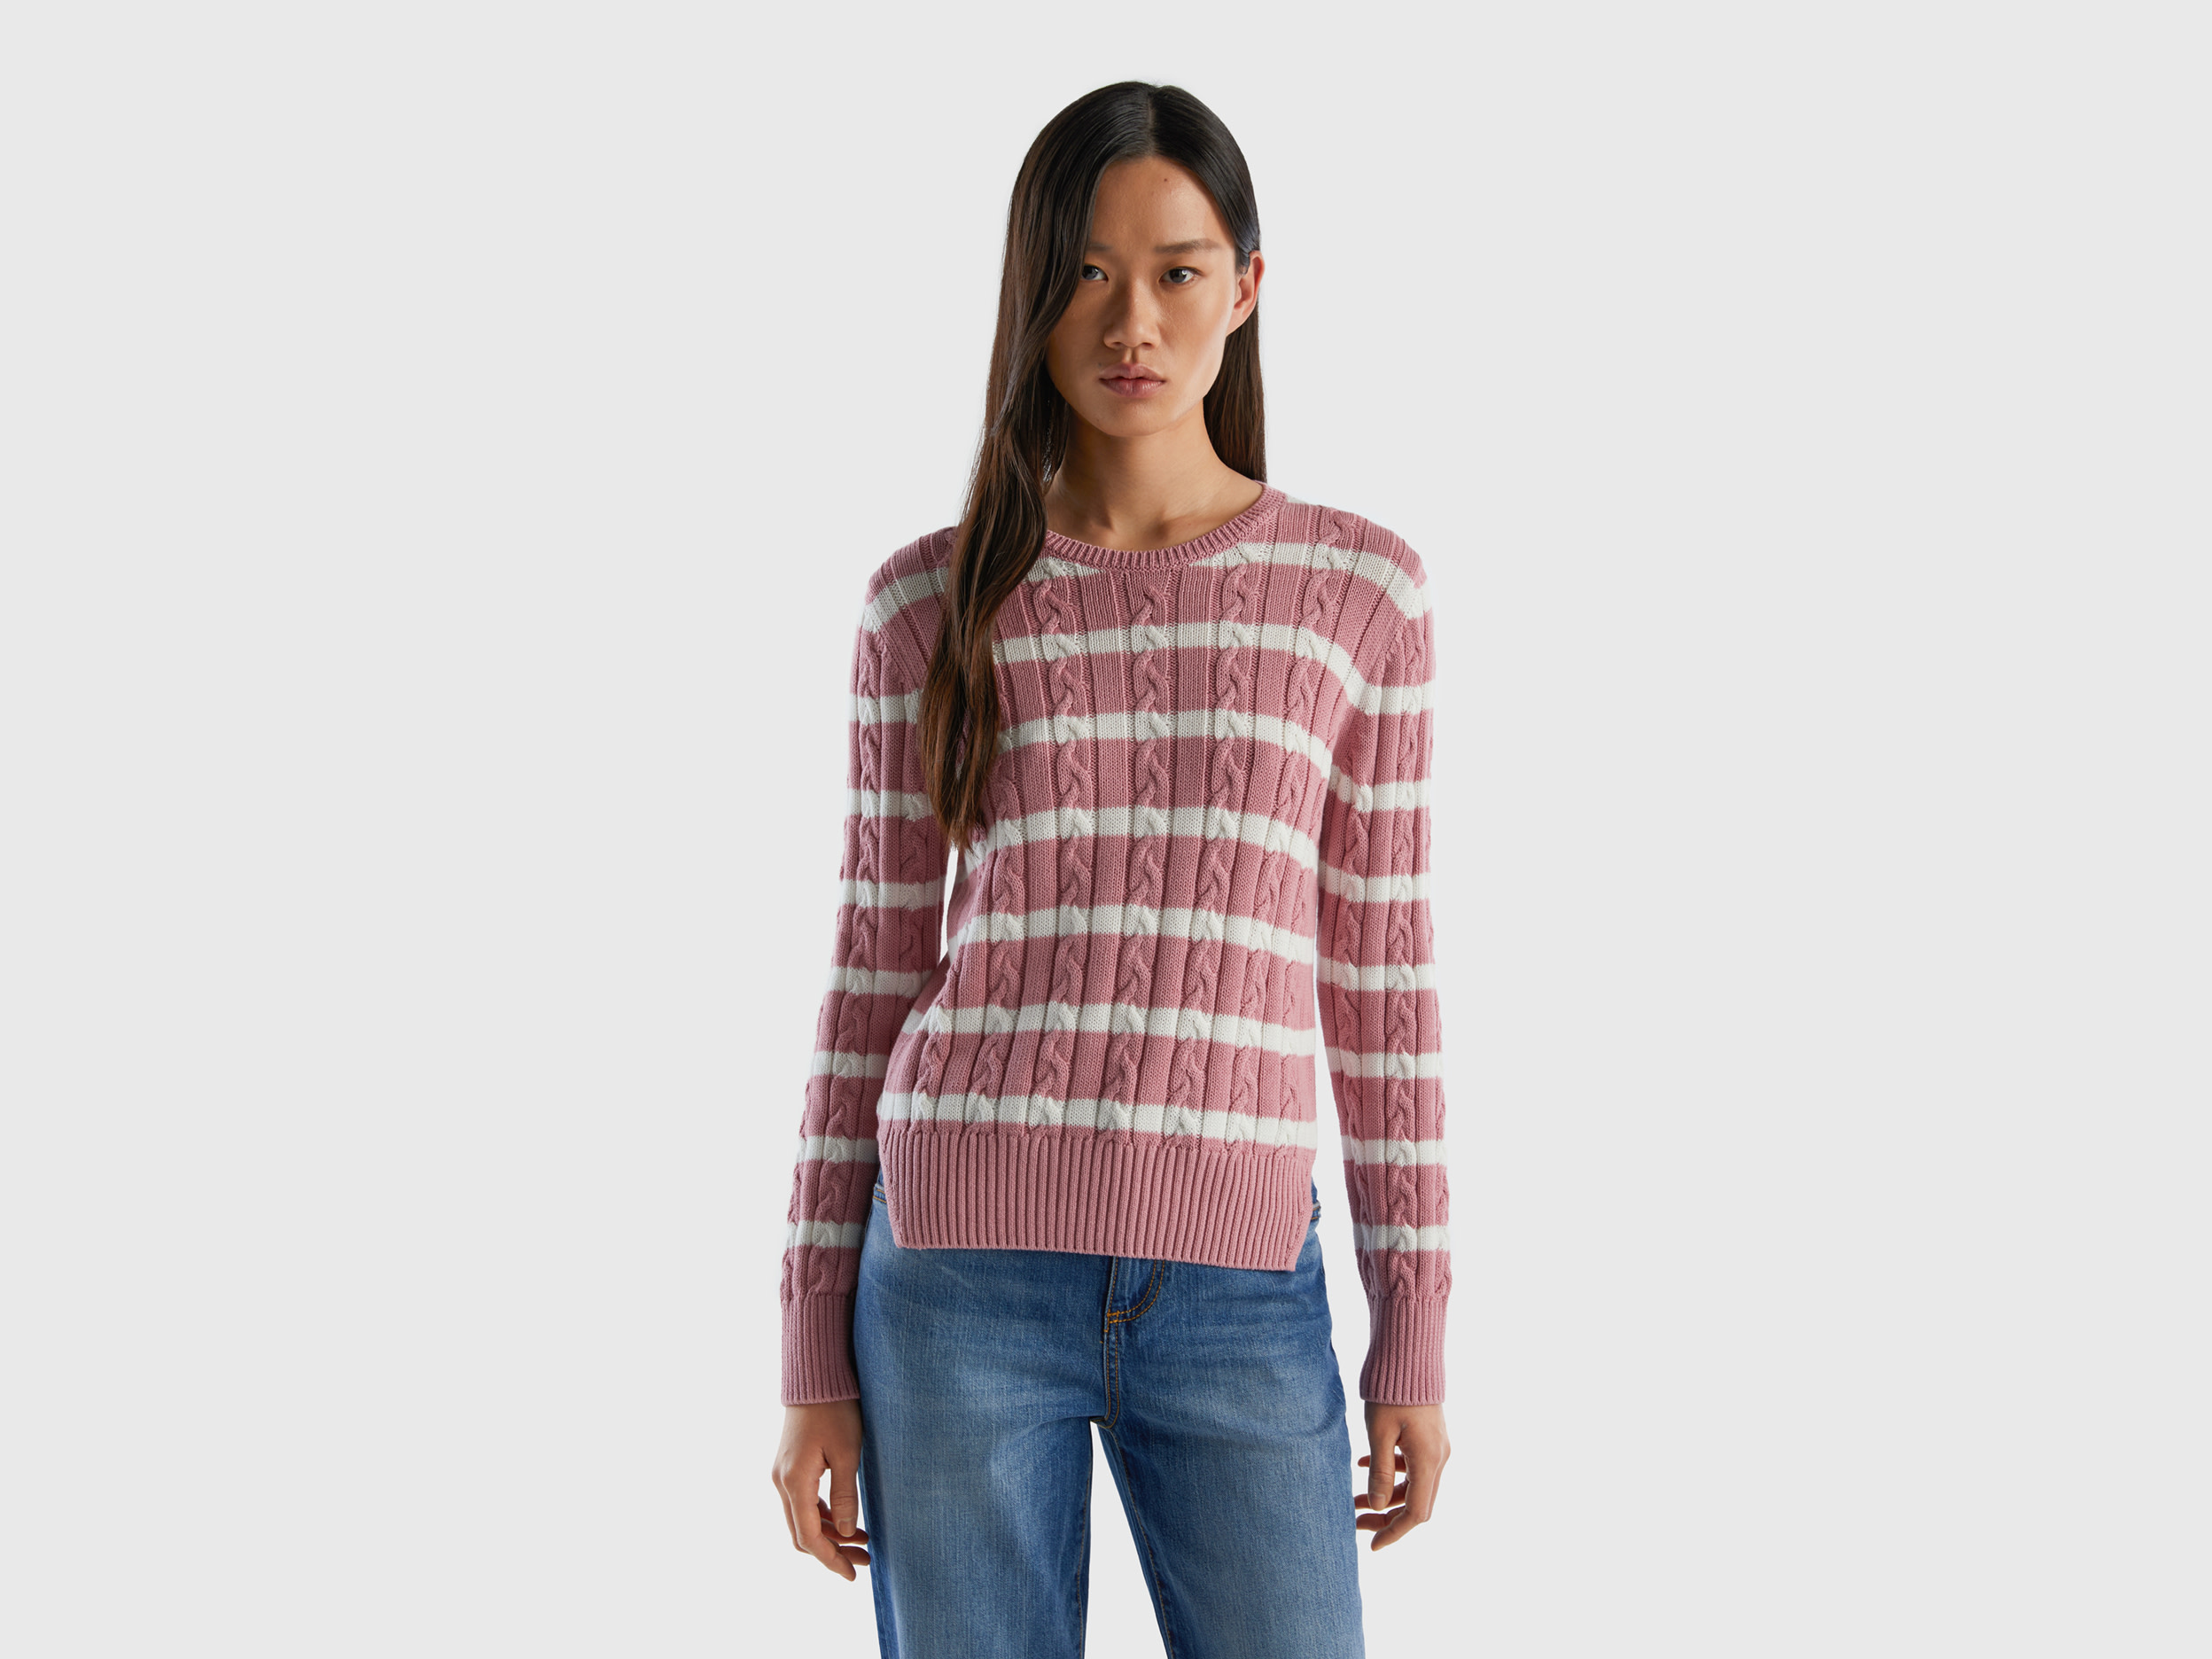 Benetton, Cable Knit Sweater 100% Cotton, Size L, Pink, Women